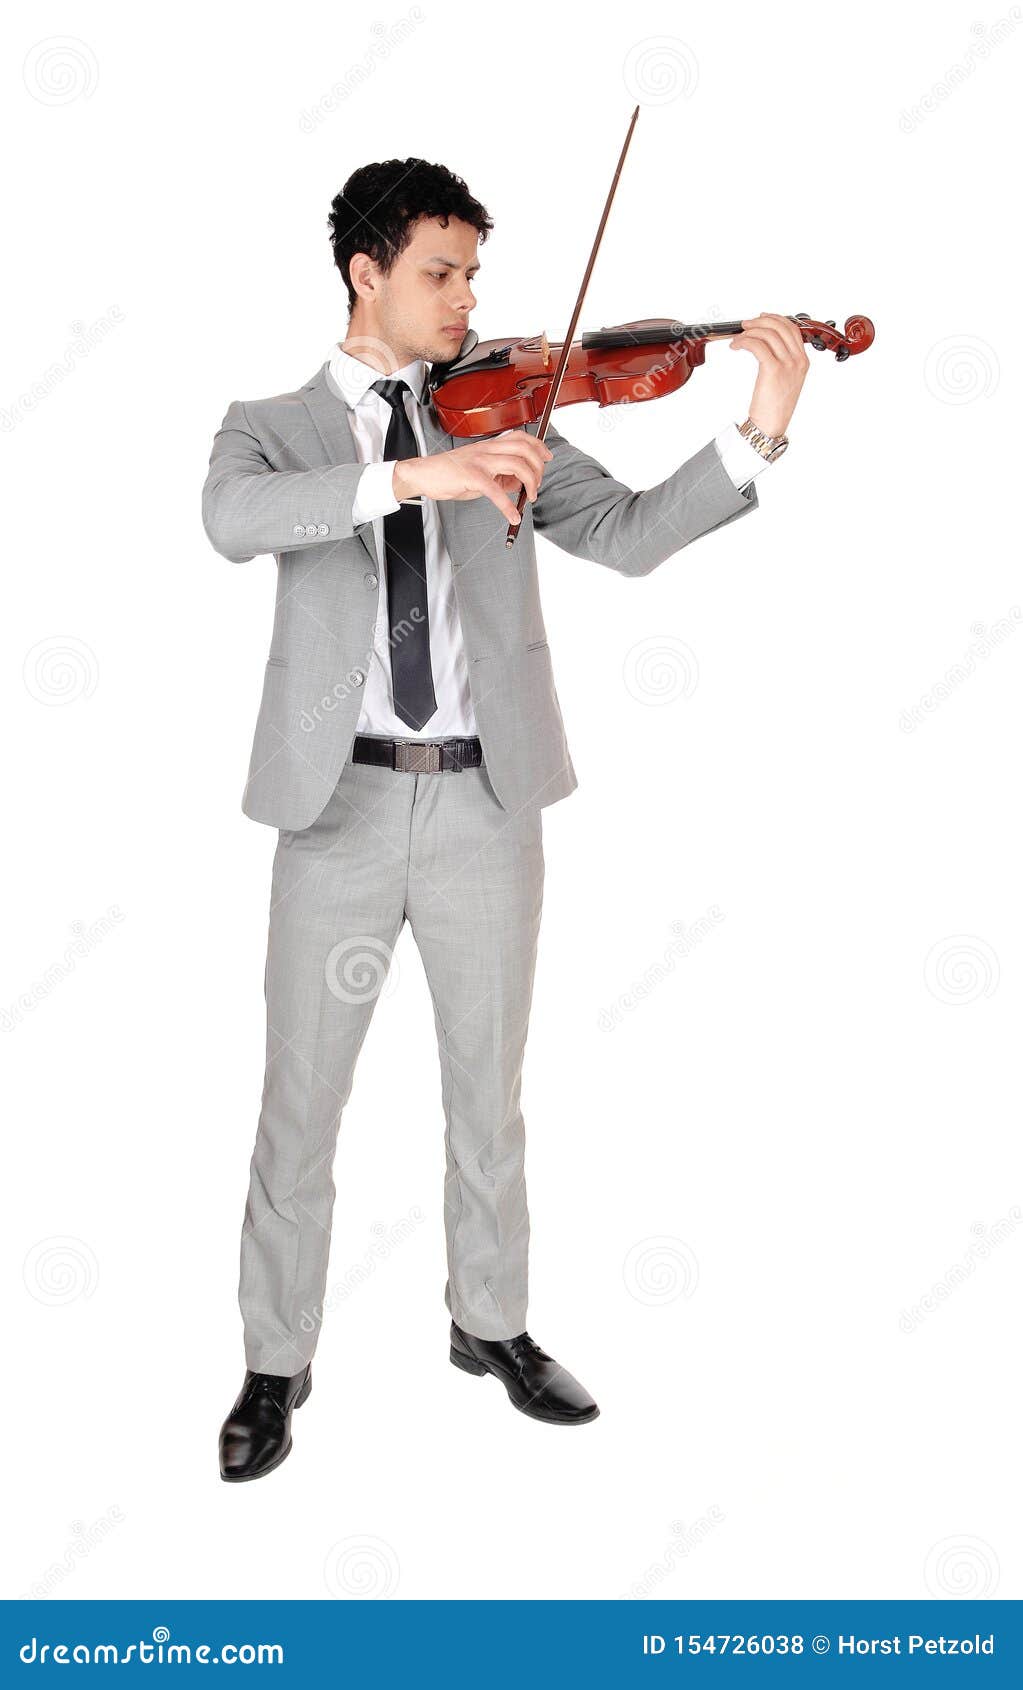 A Full Body Image of Young Man Playing the Violin Stock Photo - Image of  classic, handsome: 154726038